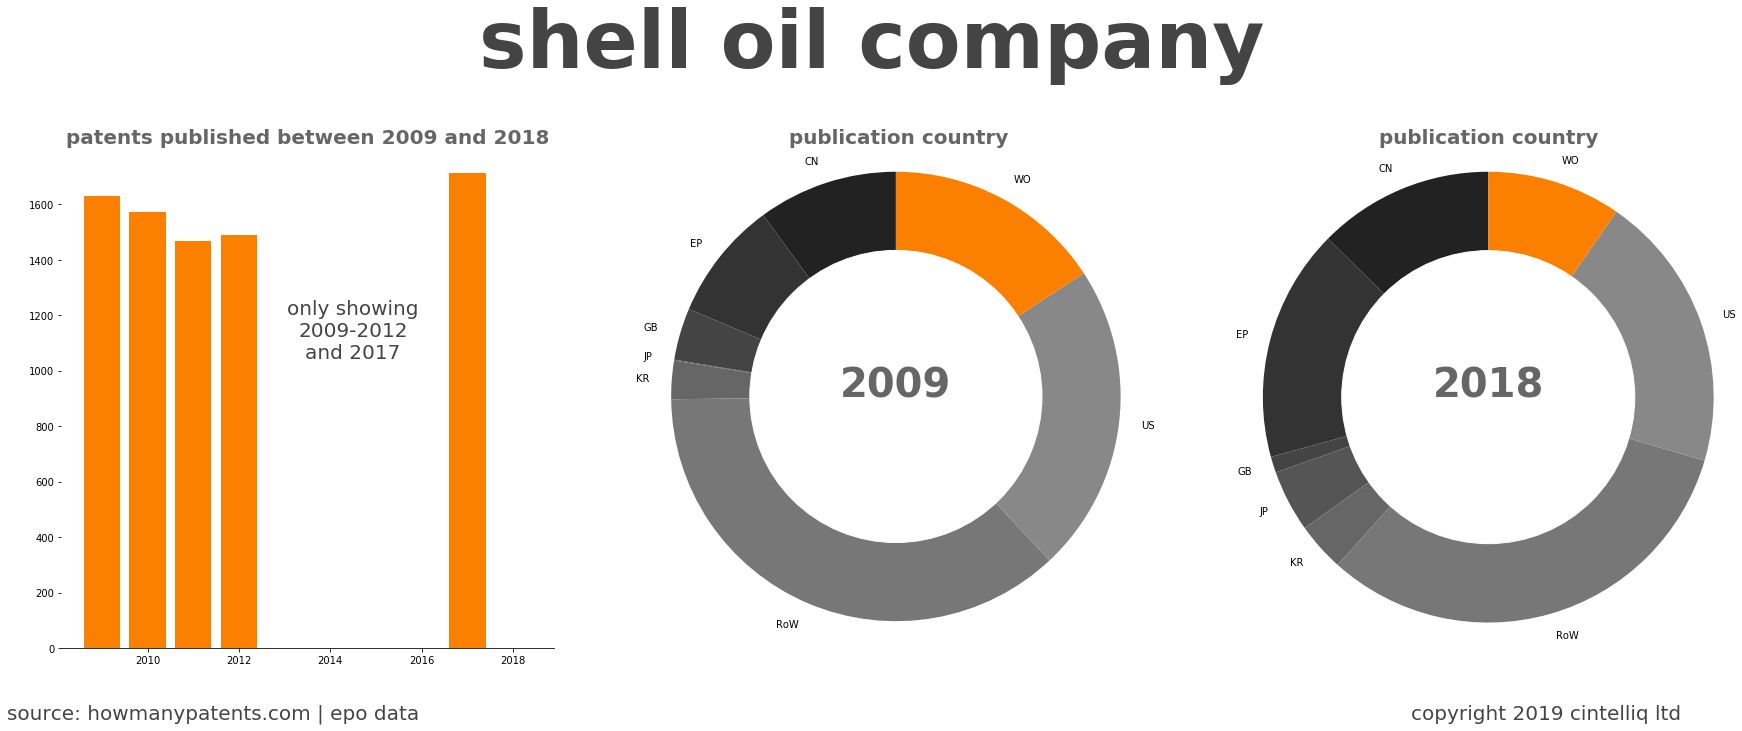 summary of patents for Shell Oil Company